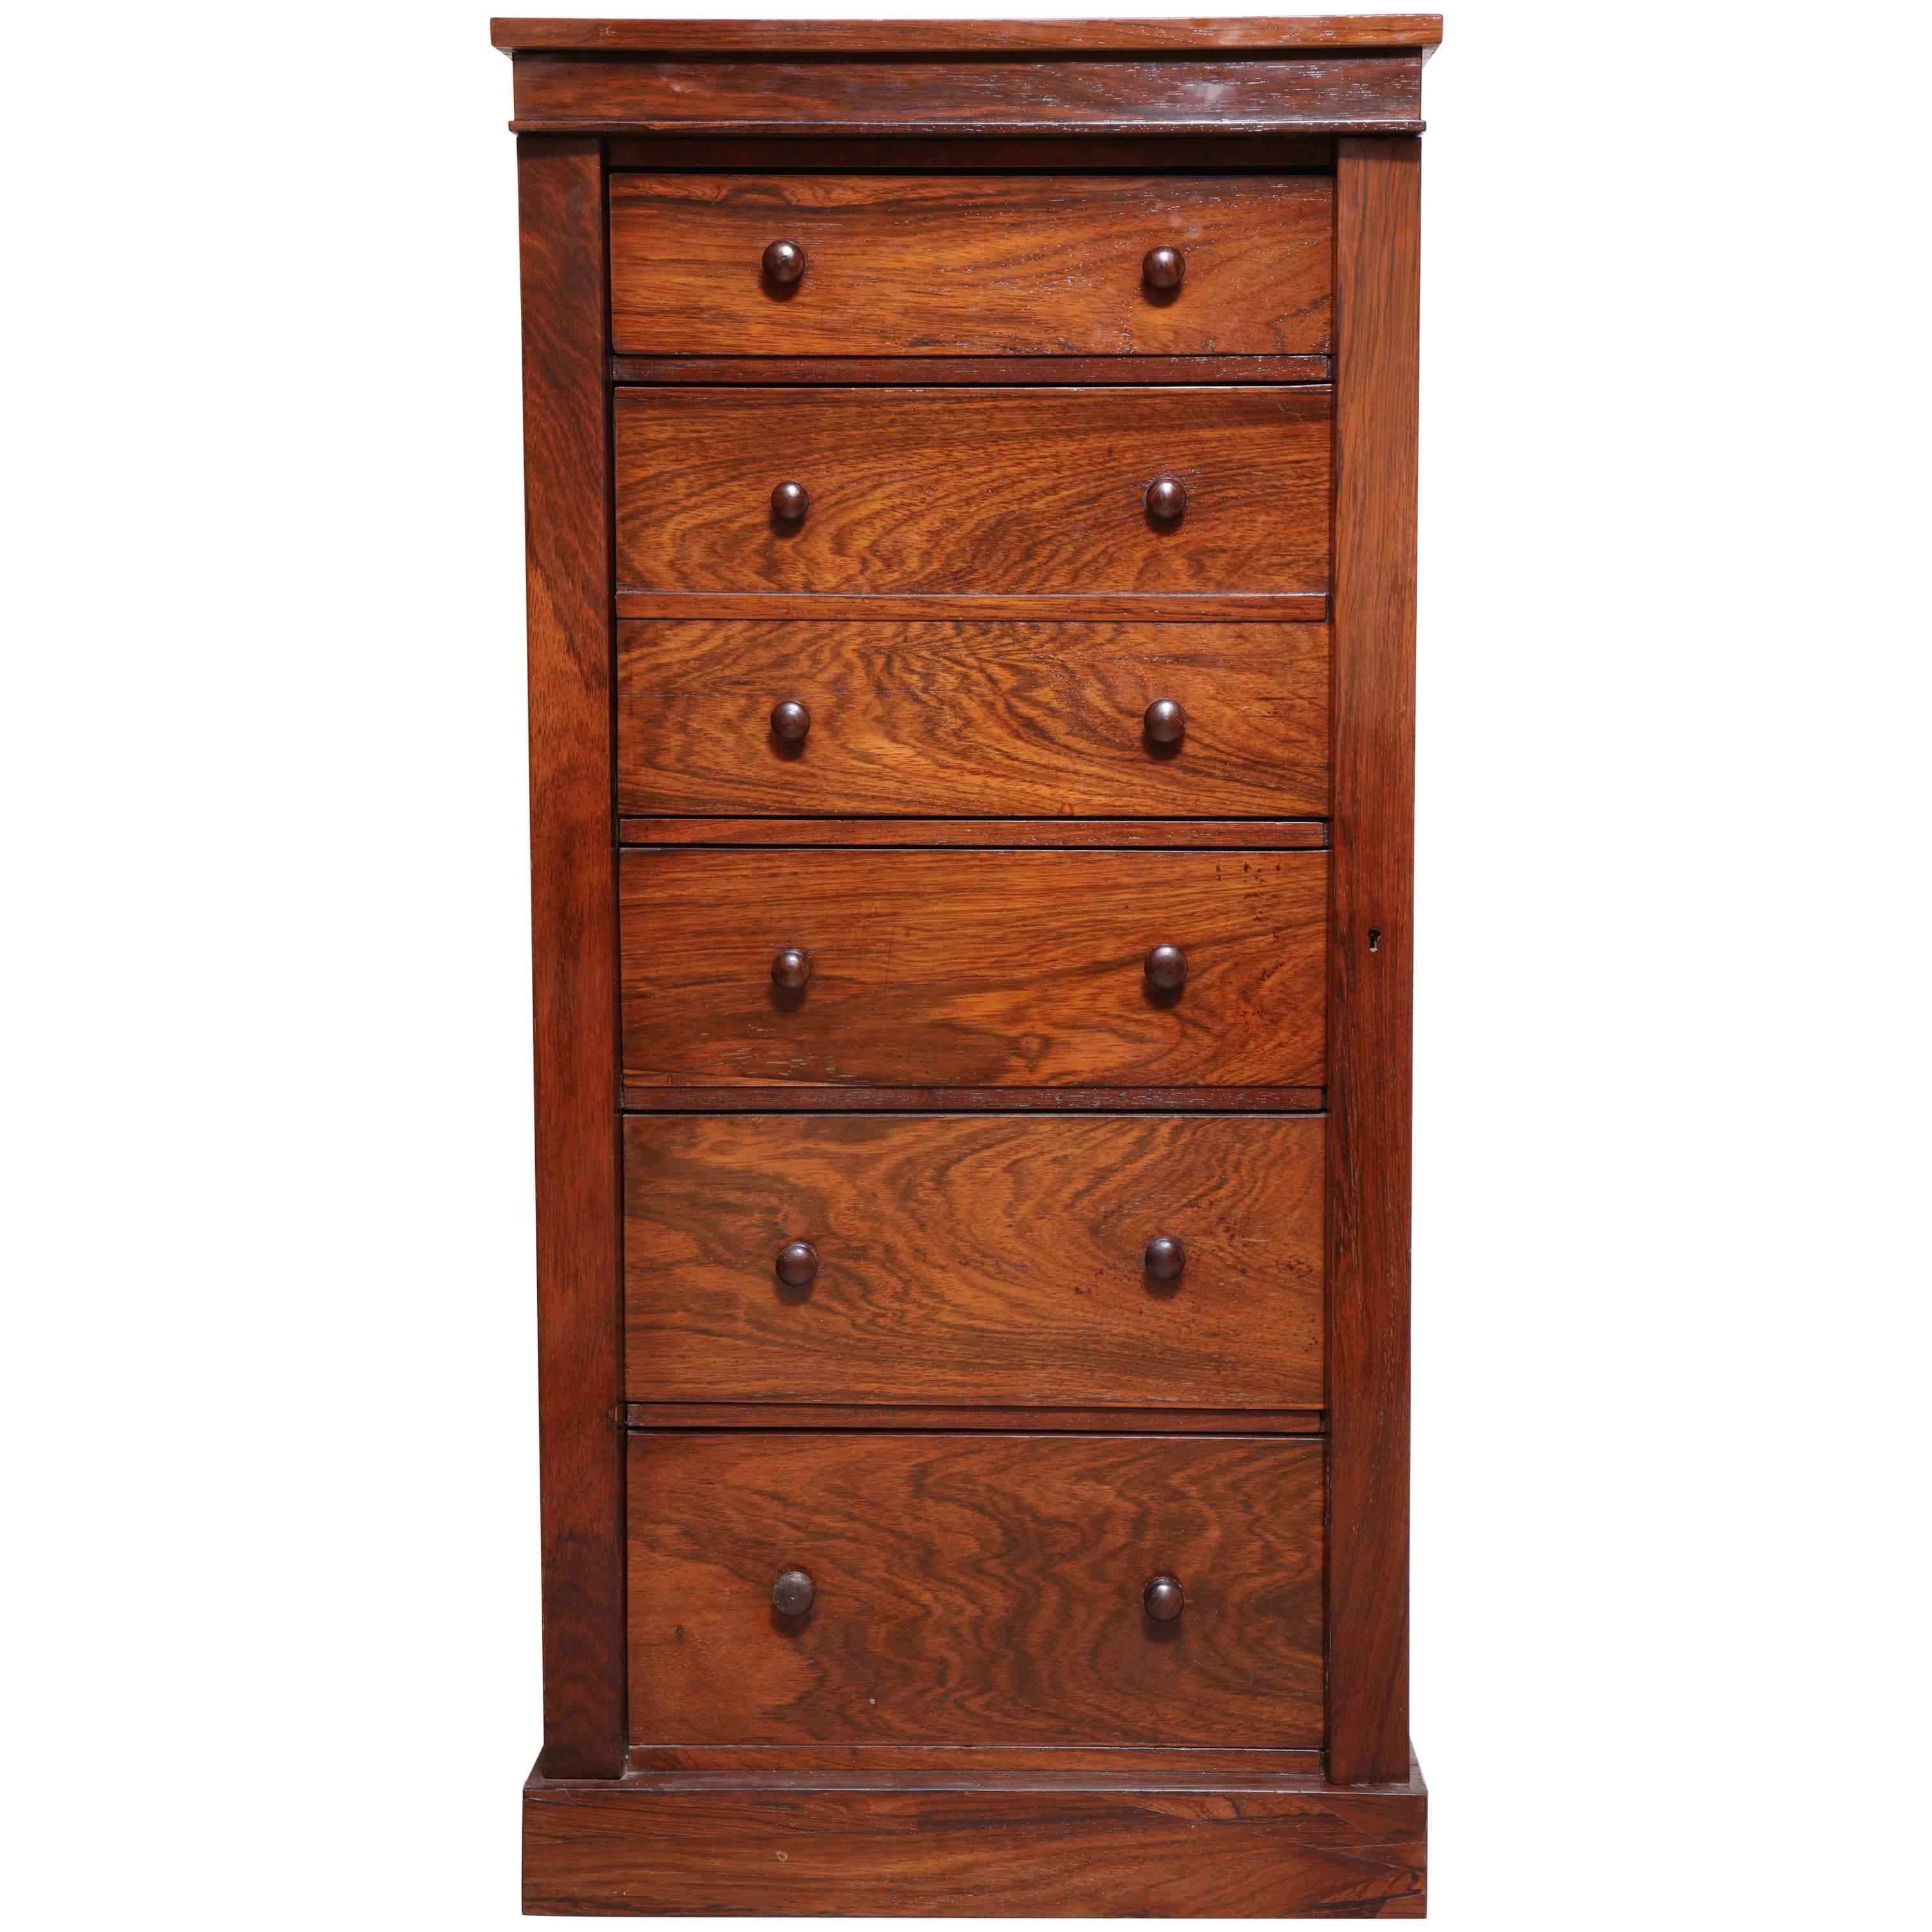 English Wellington Chest of Drawers